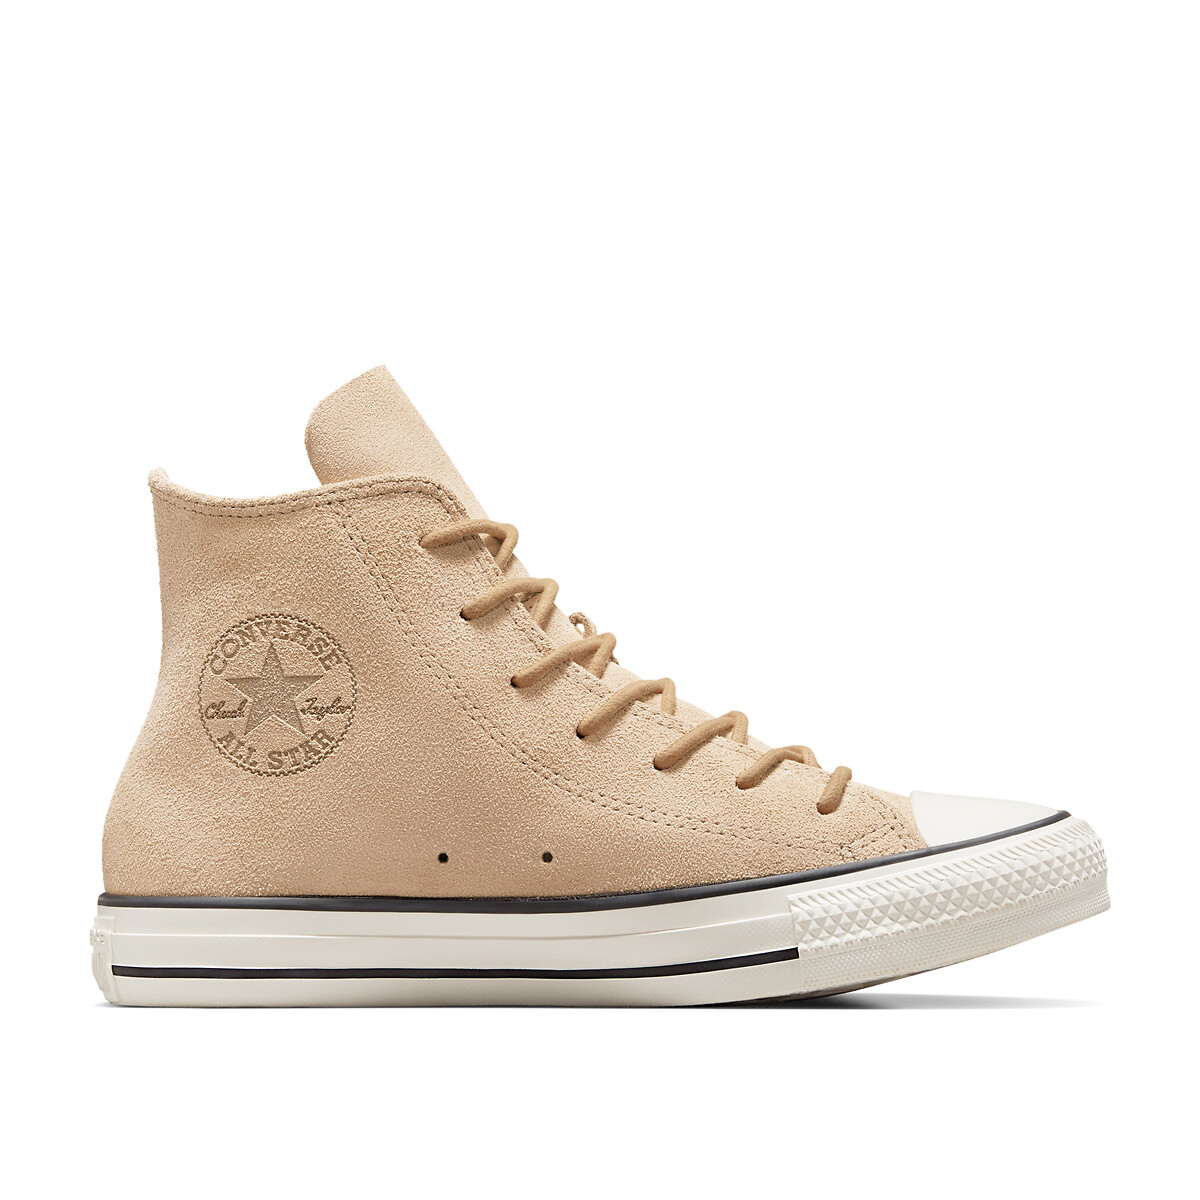 Image of All Star Hi Fashion Suede & Leather High Top Trainers